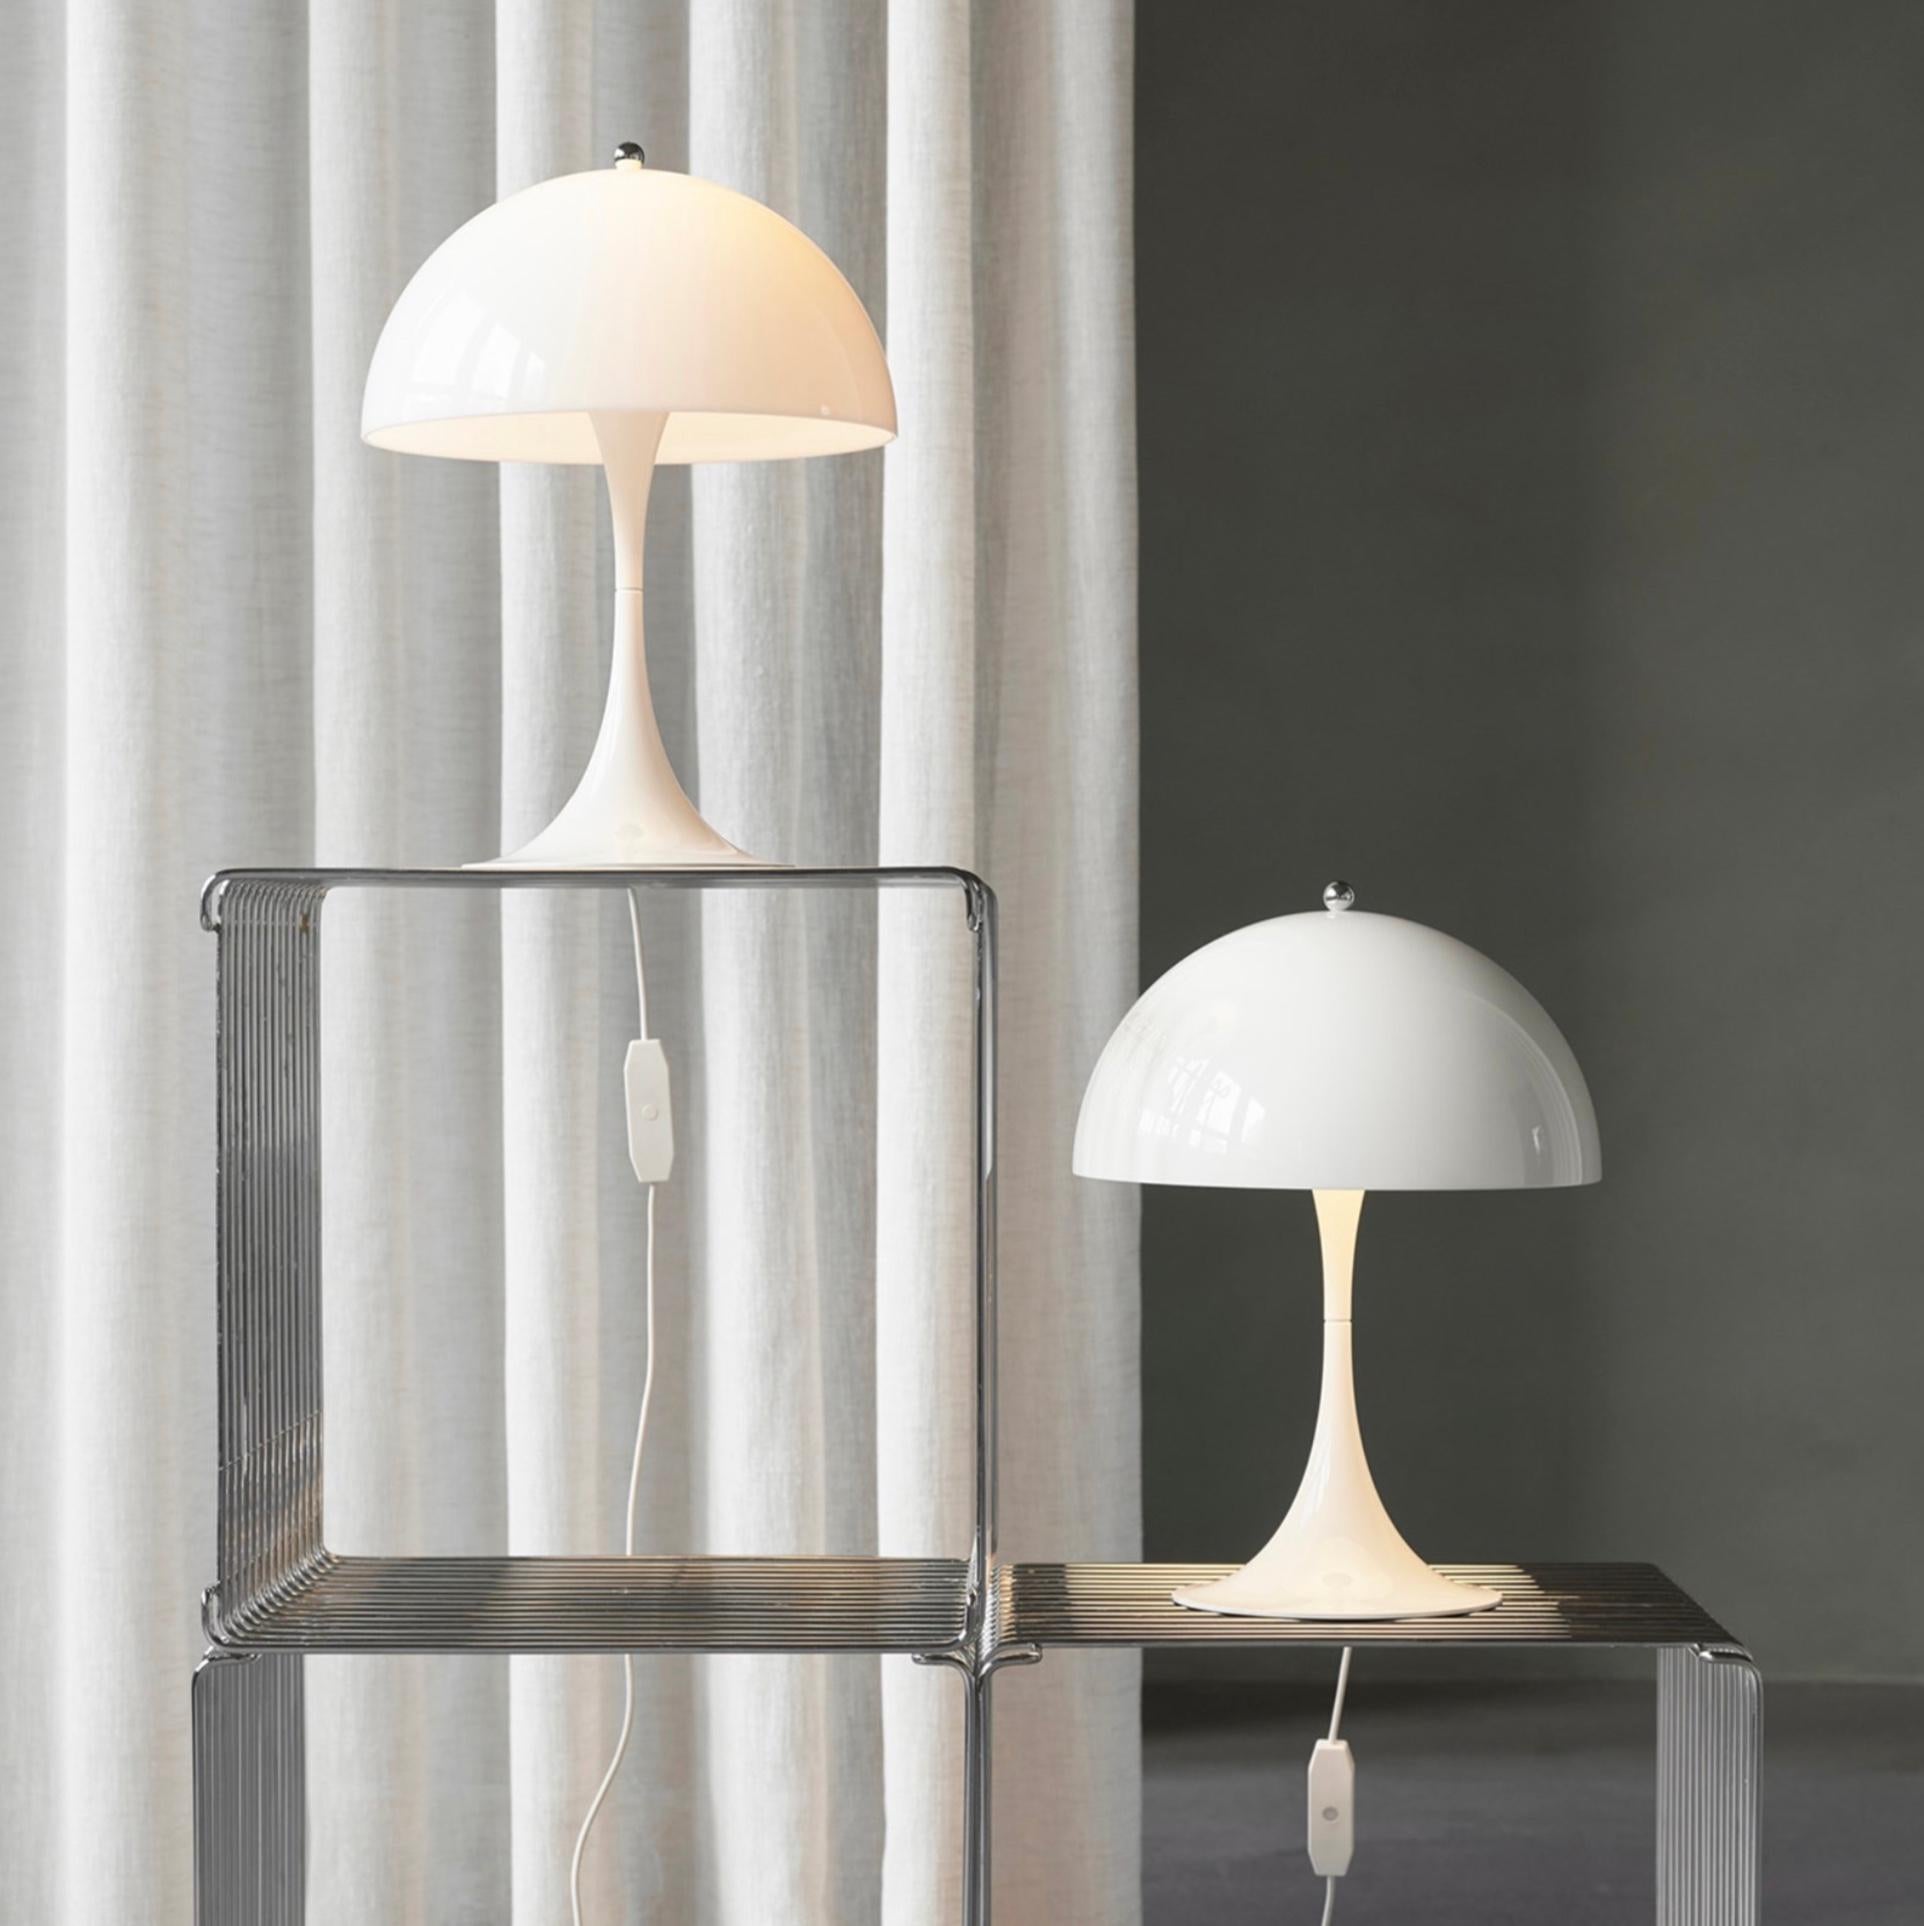 Mid-Century Modern Verner Panton 'Panthella 250' Table Lamp in 'Pale Blue' for Louis Poulsen For Sale